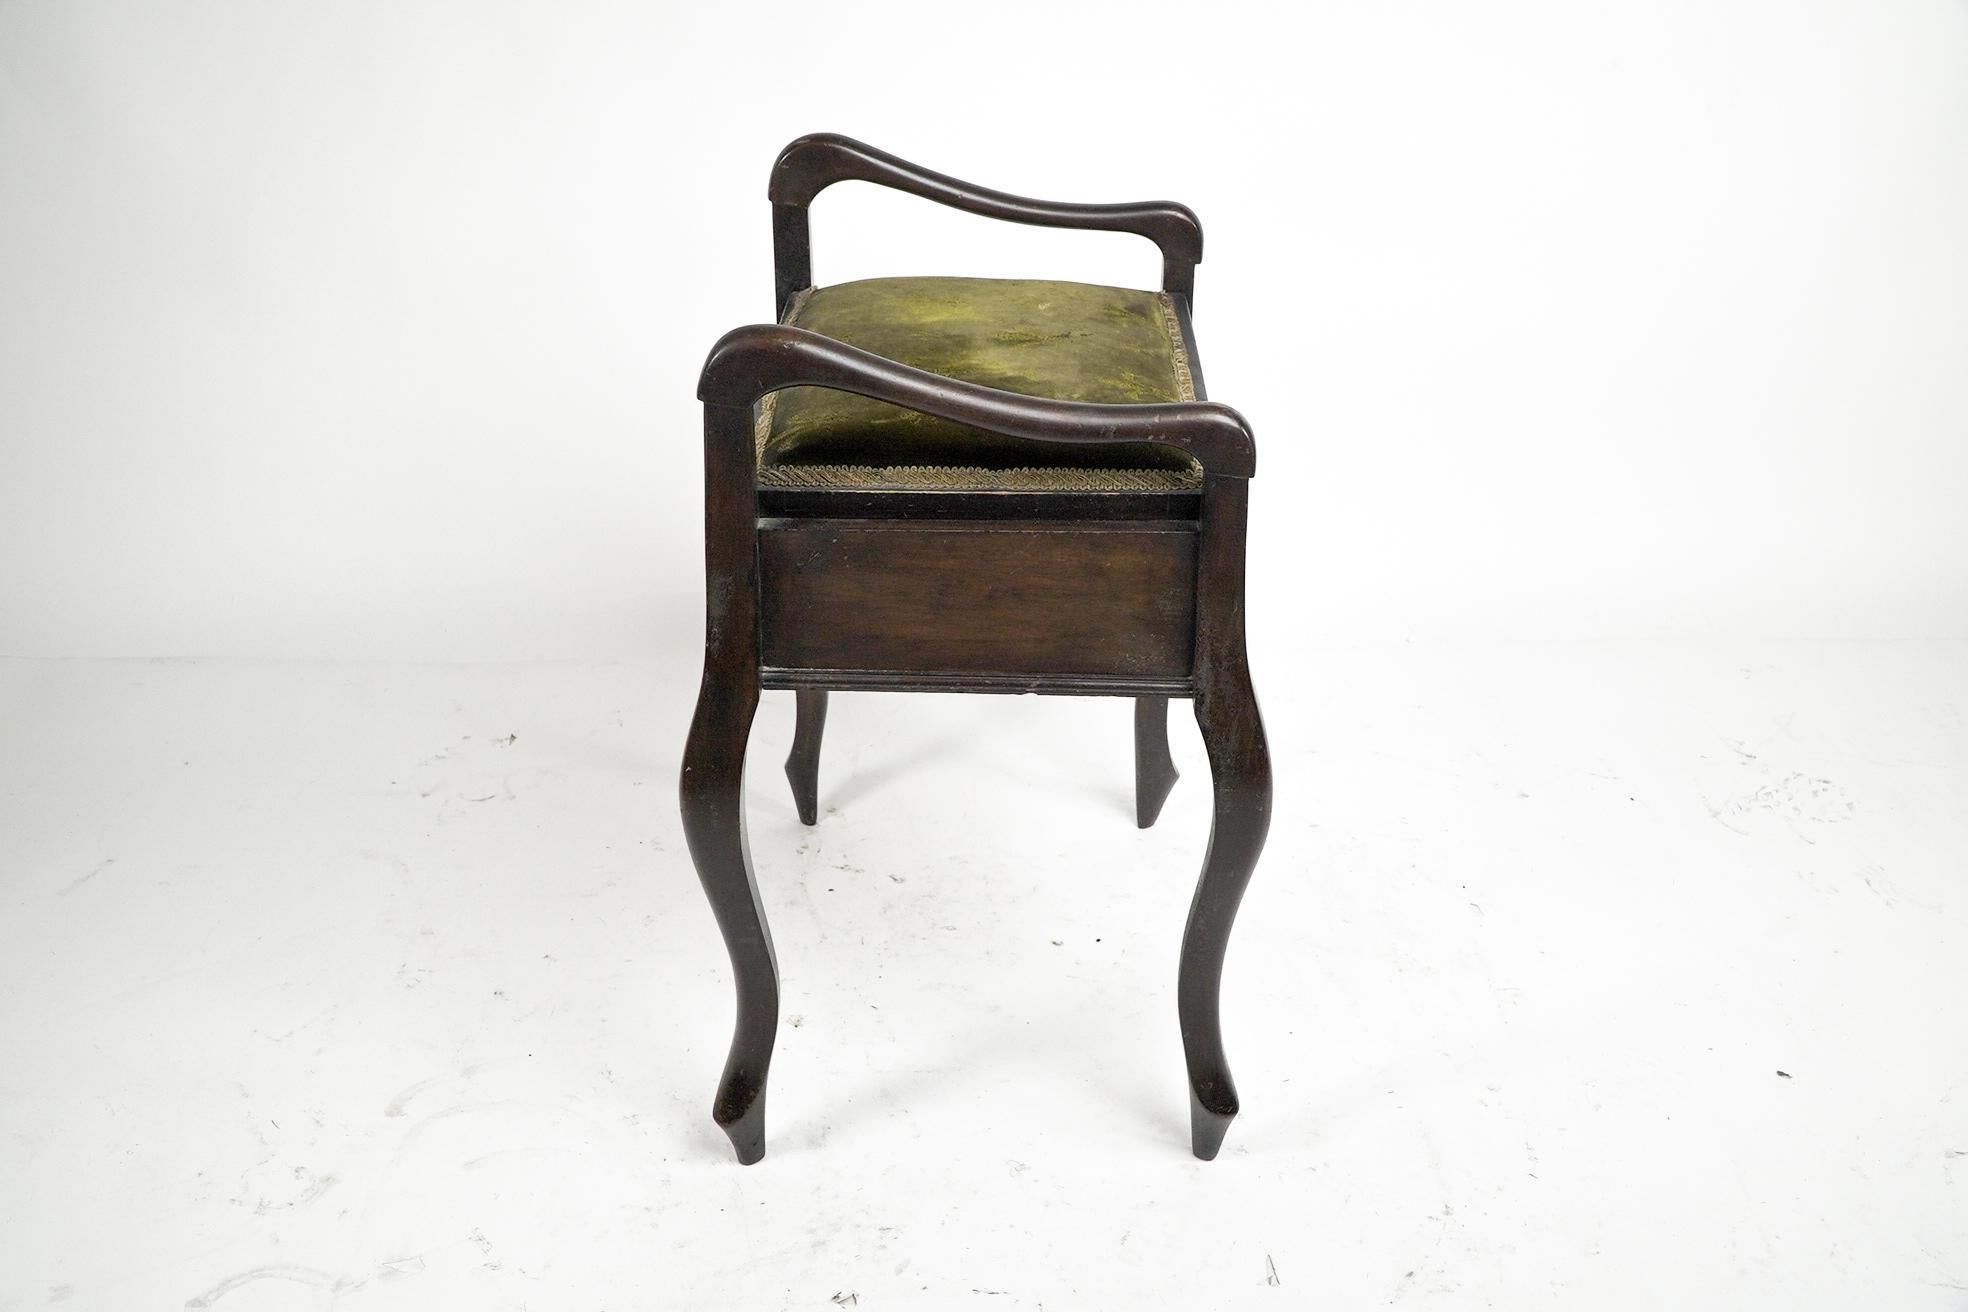 An Edwardian stained Beech piano stool with curvaceous upper arms and legs, period green fabric printed with fleur de lys, and storage below the seat. 
